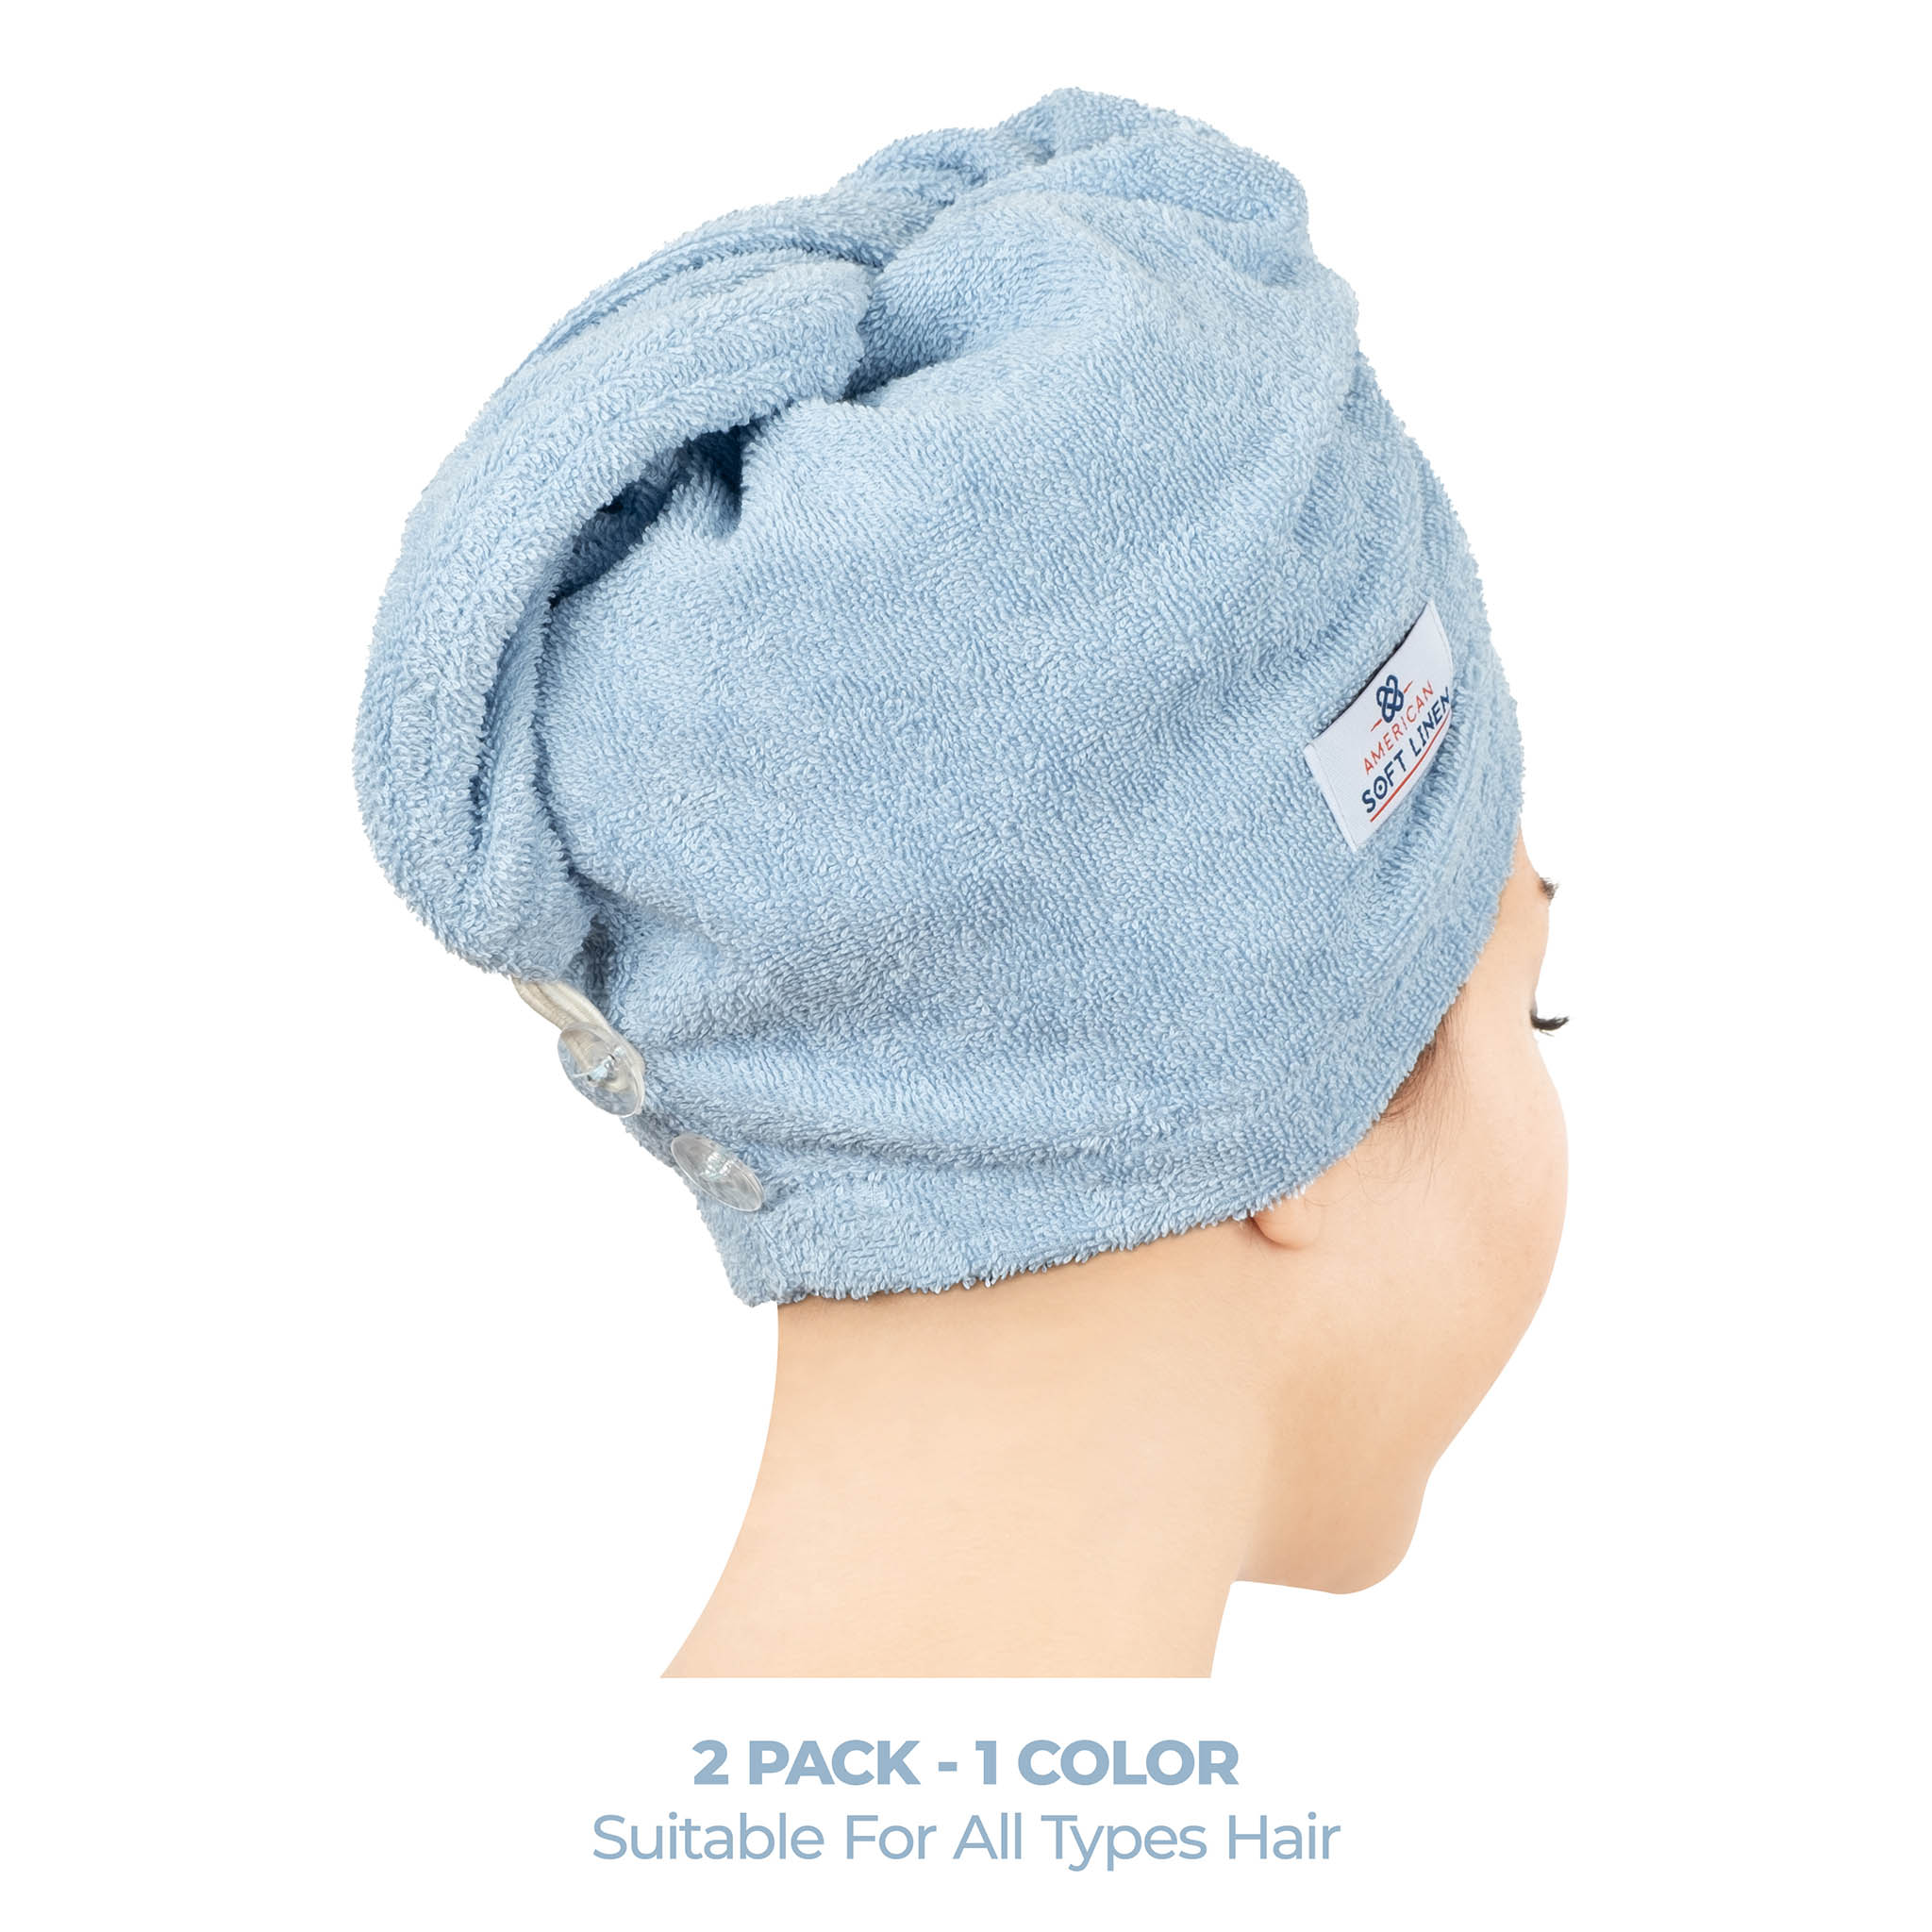 American Soft Linen 100% Cotton Hair Drying Towels for Women 2 pack 75 set case pack sky-blue-3